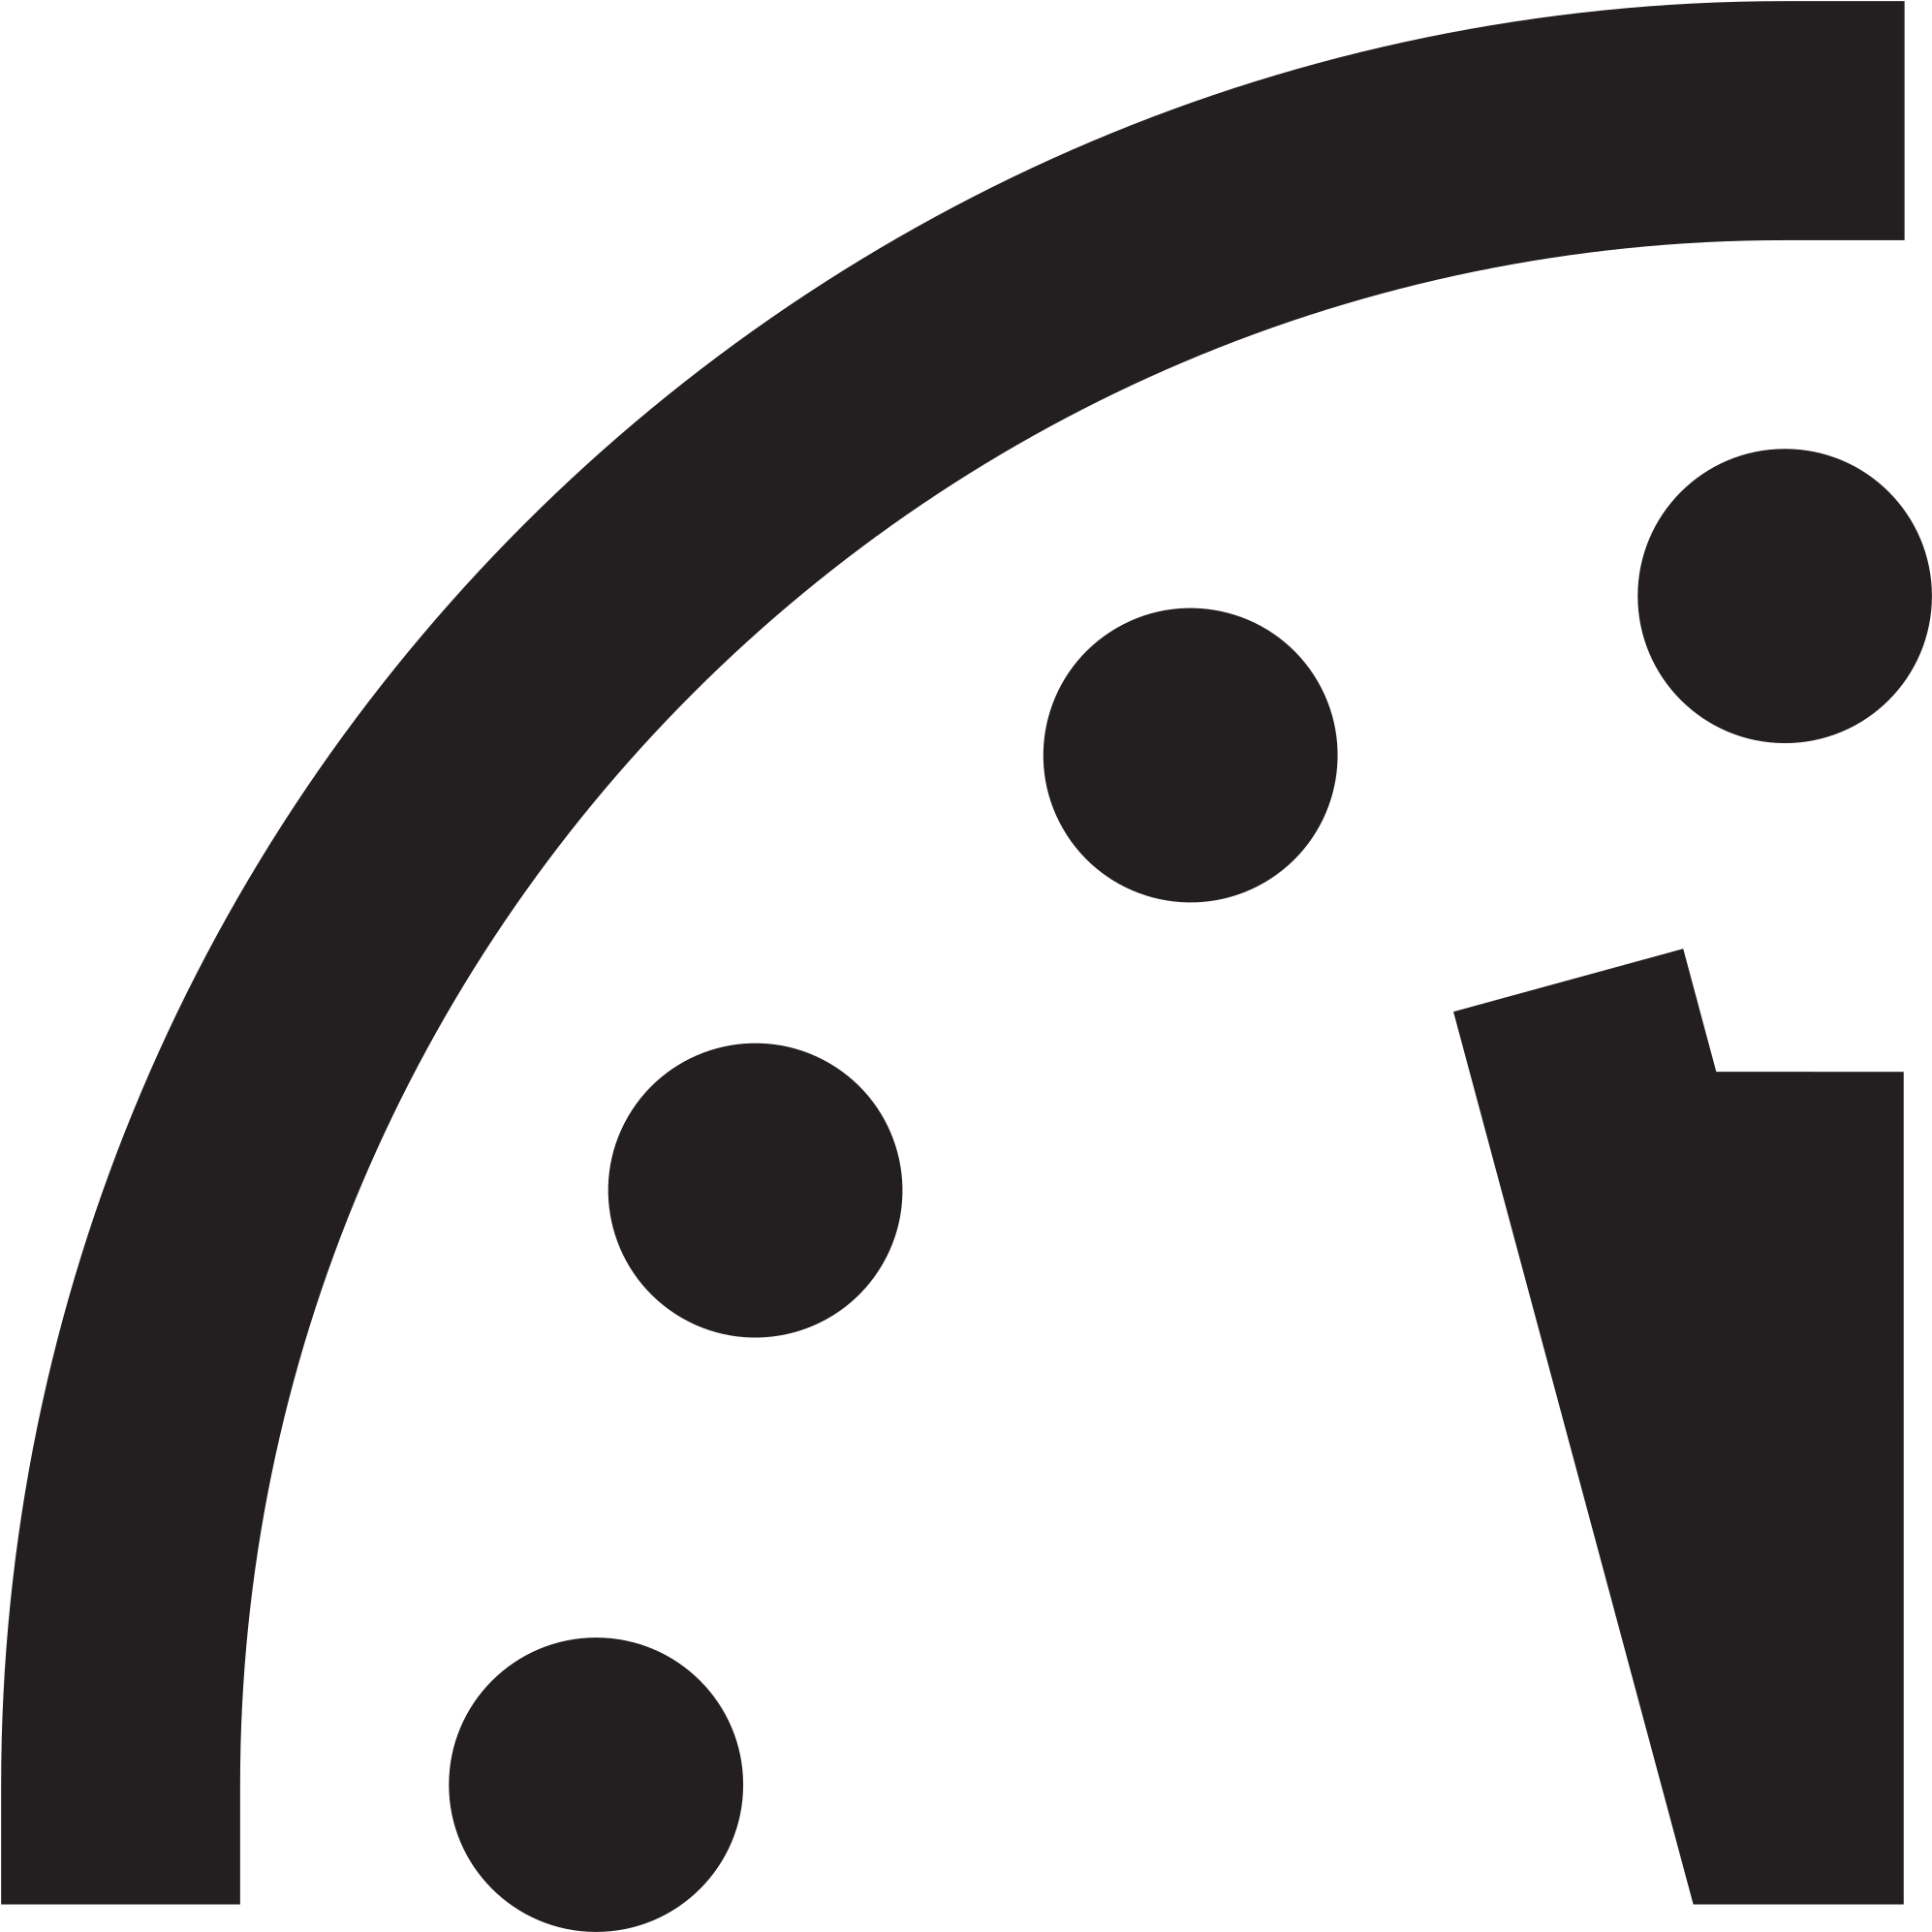 Open - Doomsday Clock Two Minutes To Midnight (2000x2000)